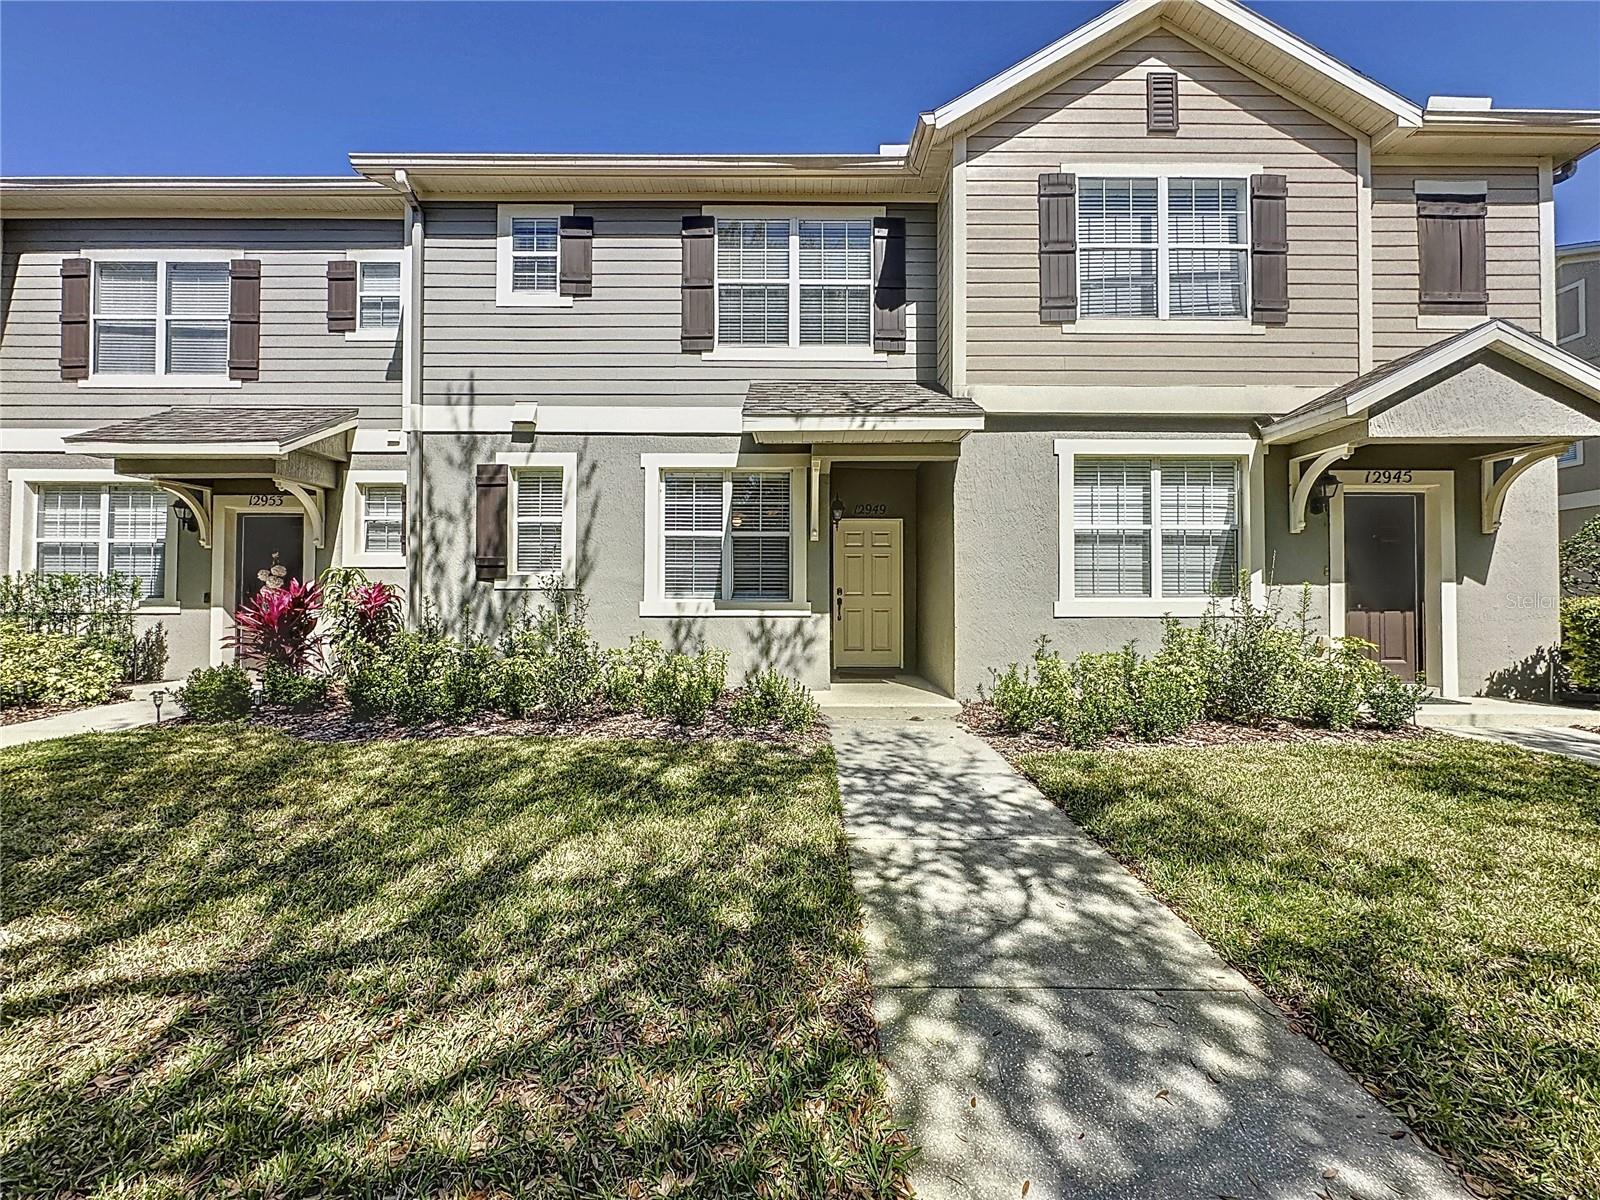 View WINDERMERE, FL 34786 townhome